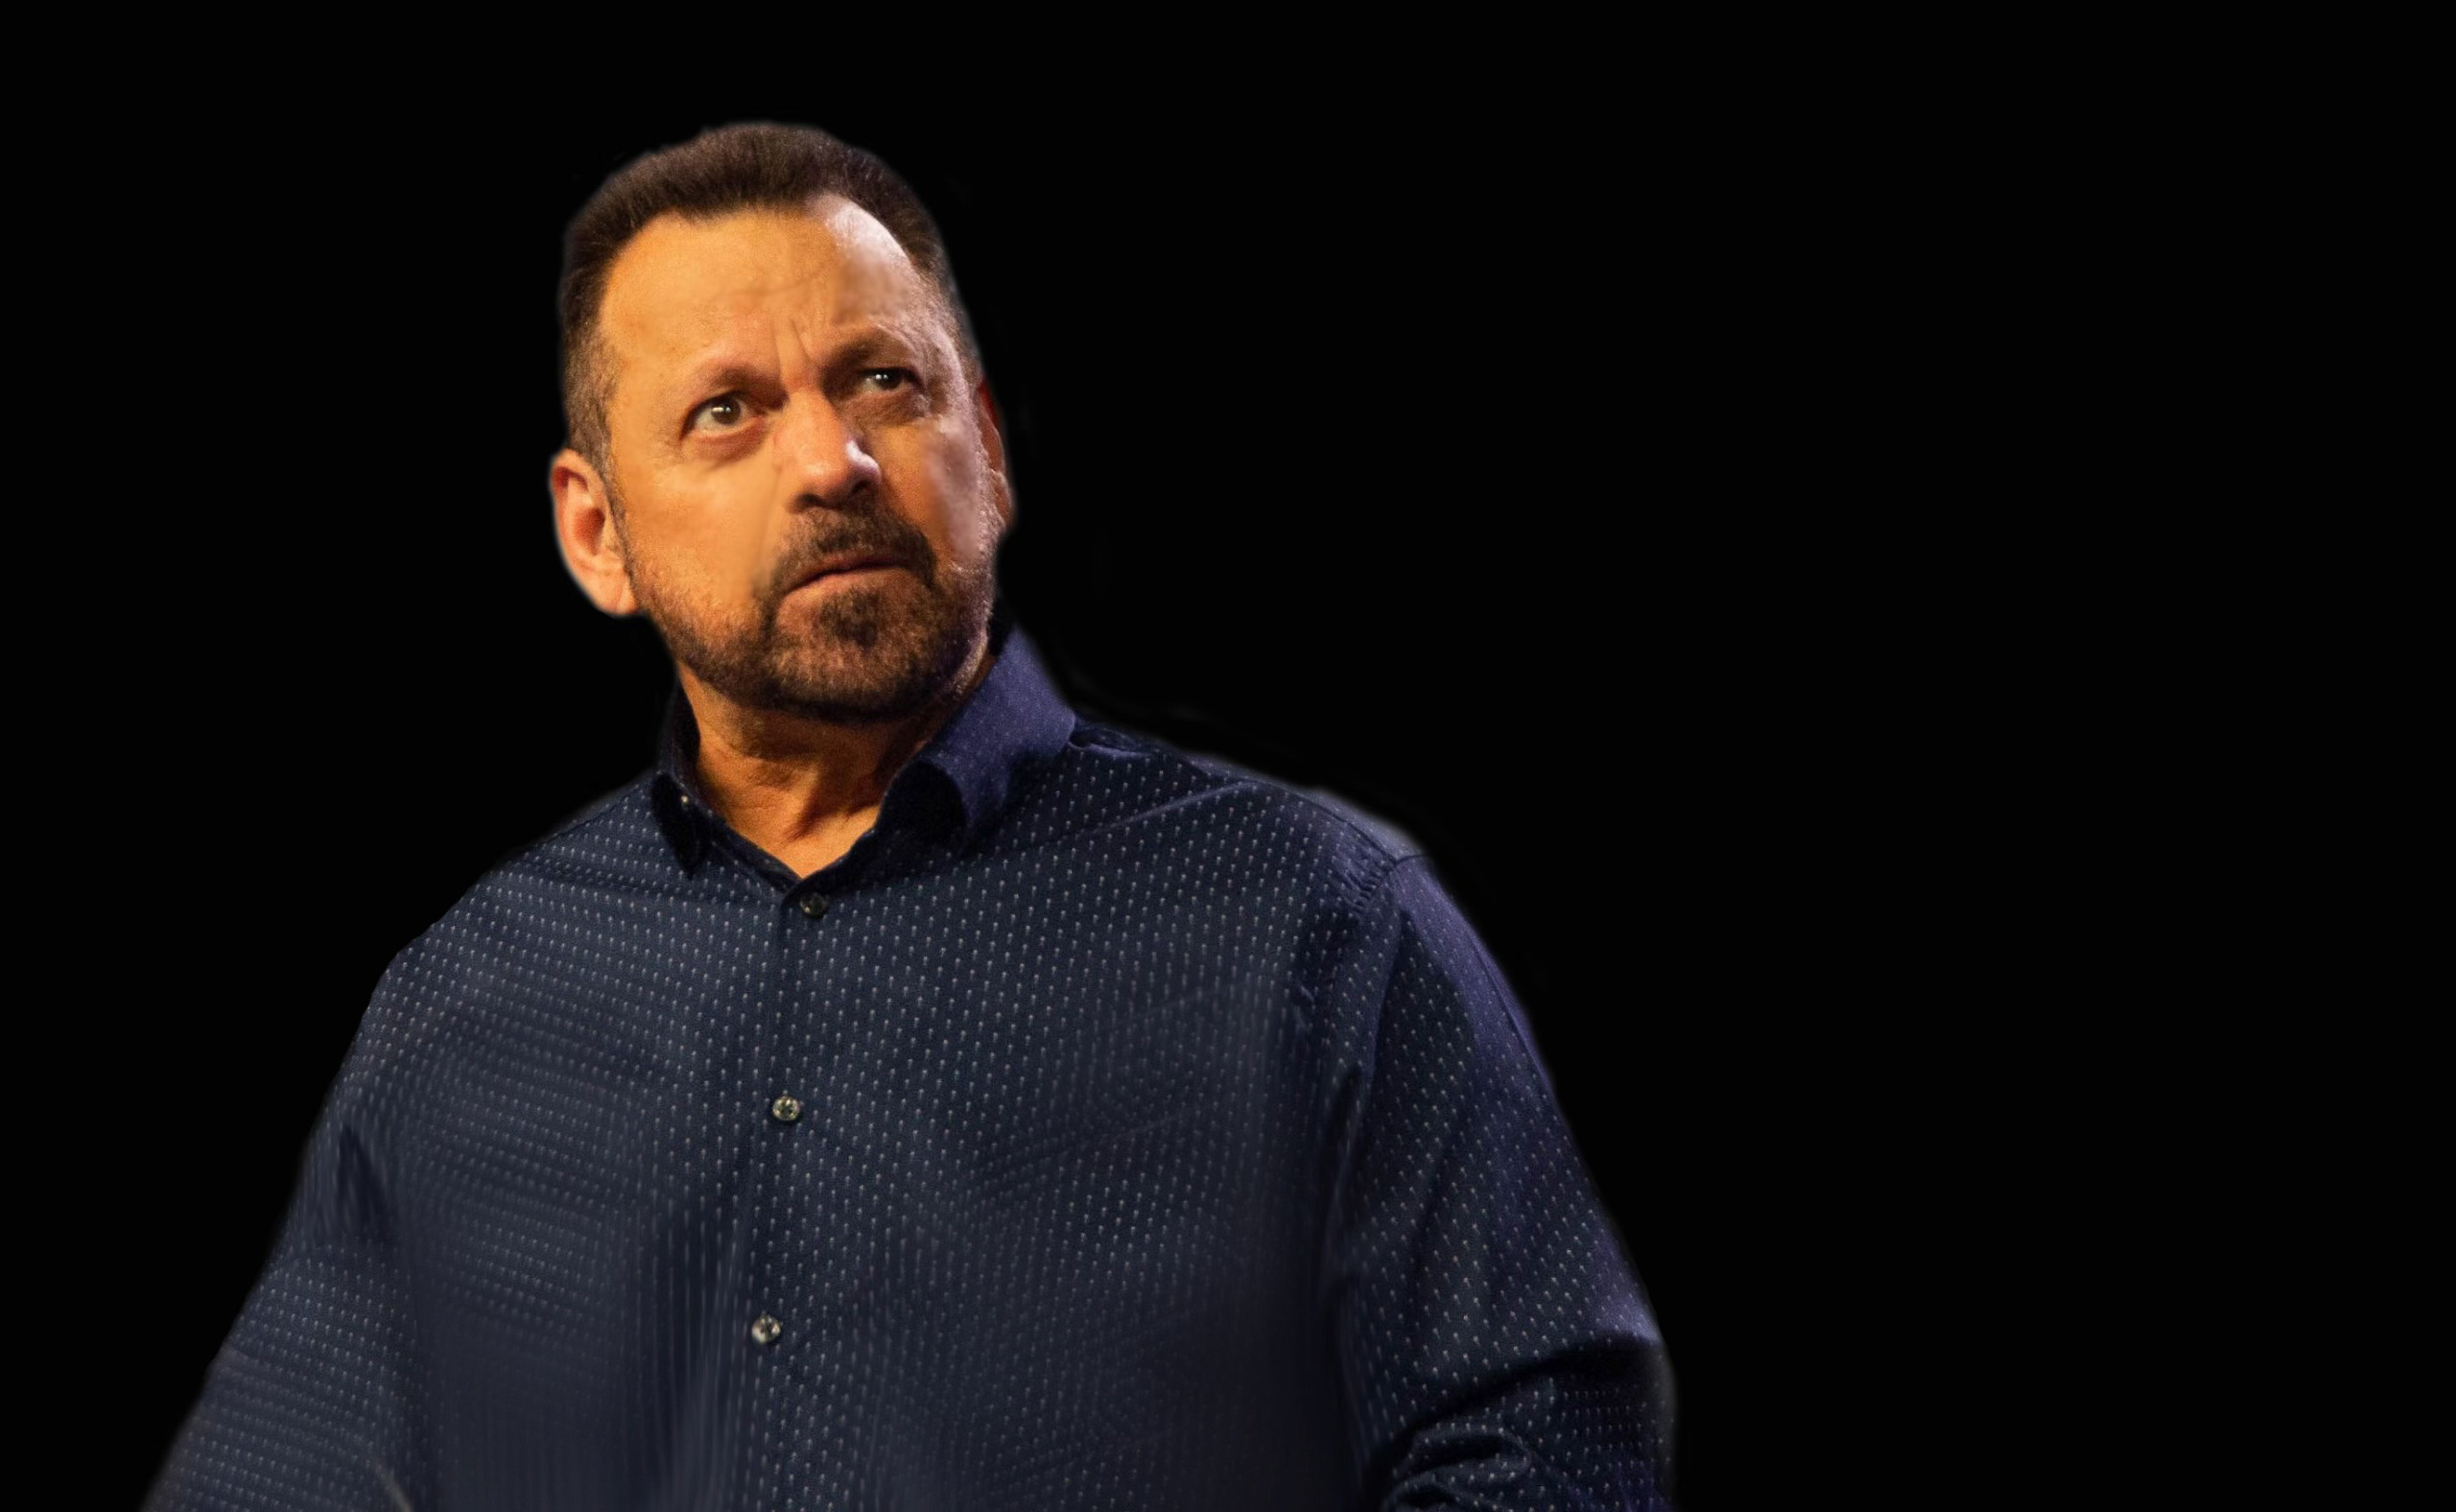 Man in blue shirt with black background, goatee